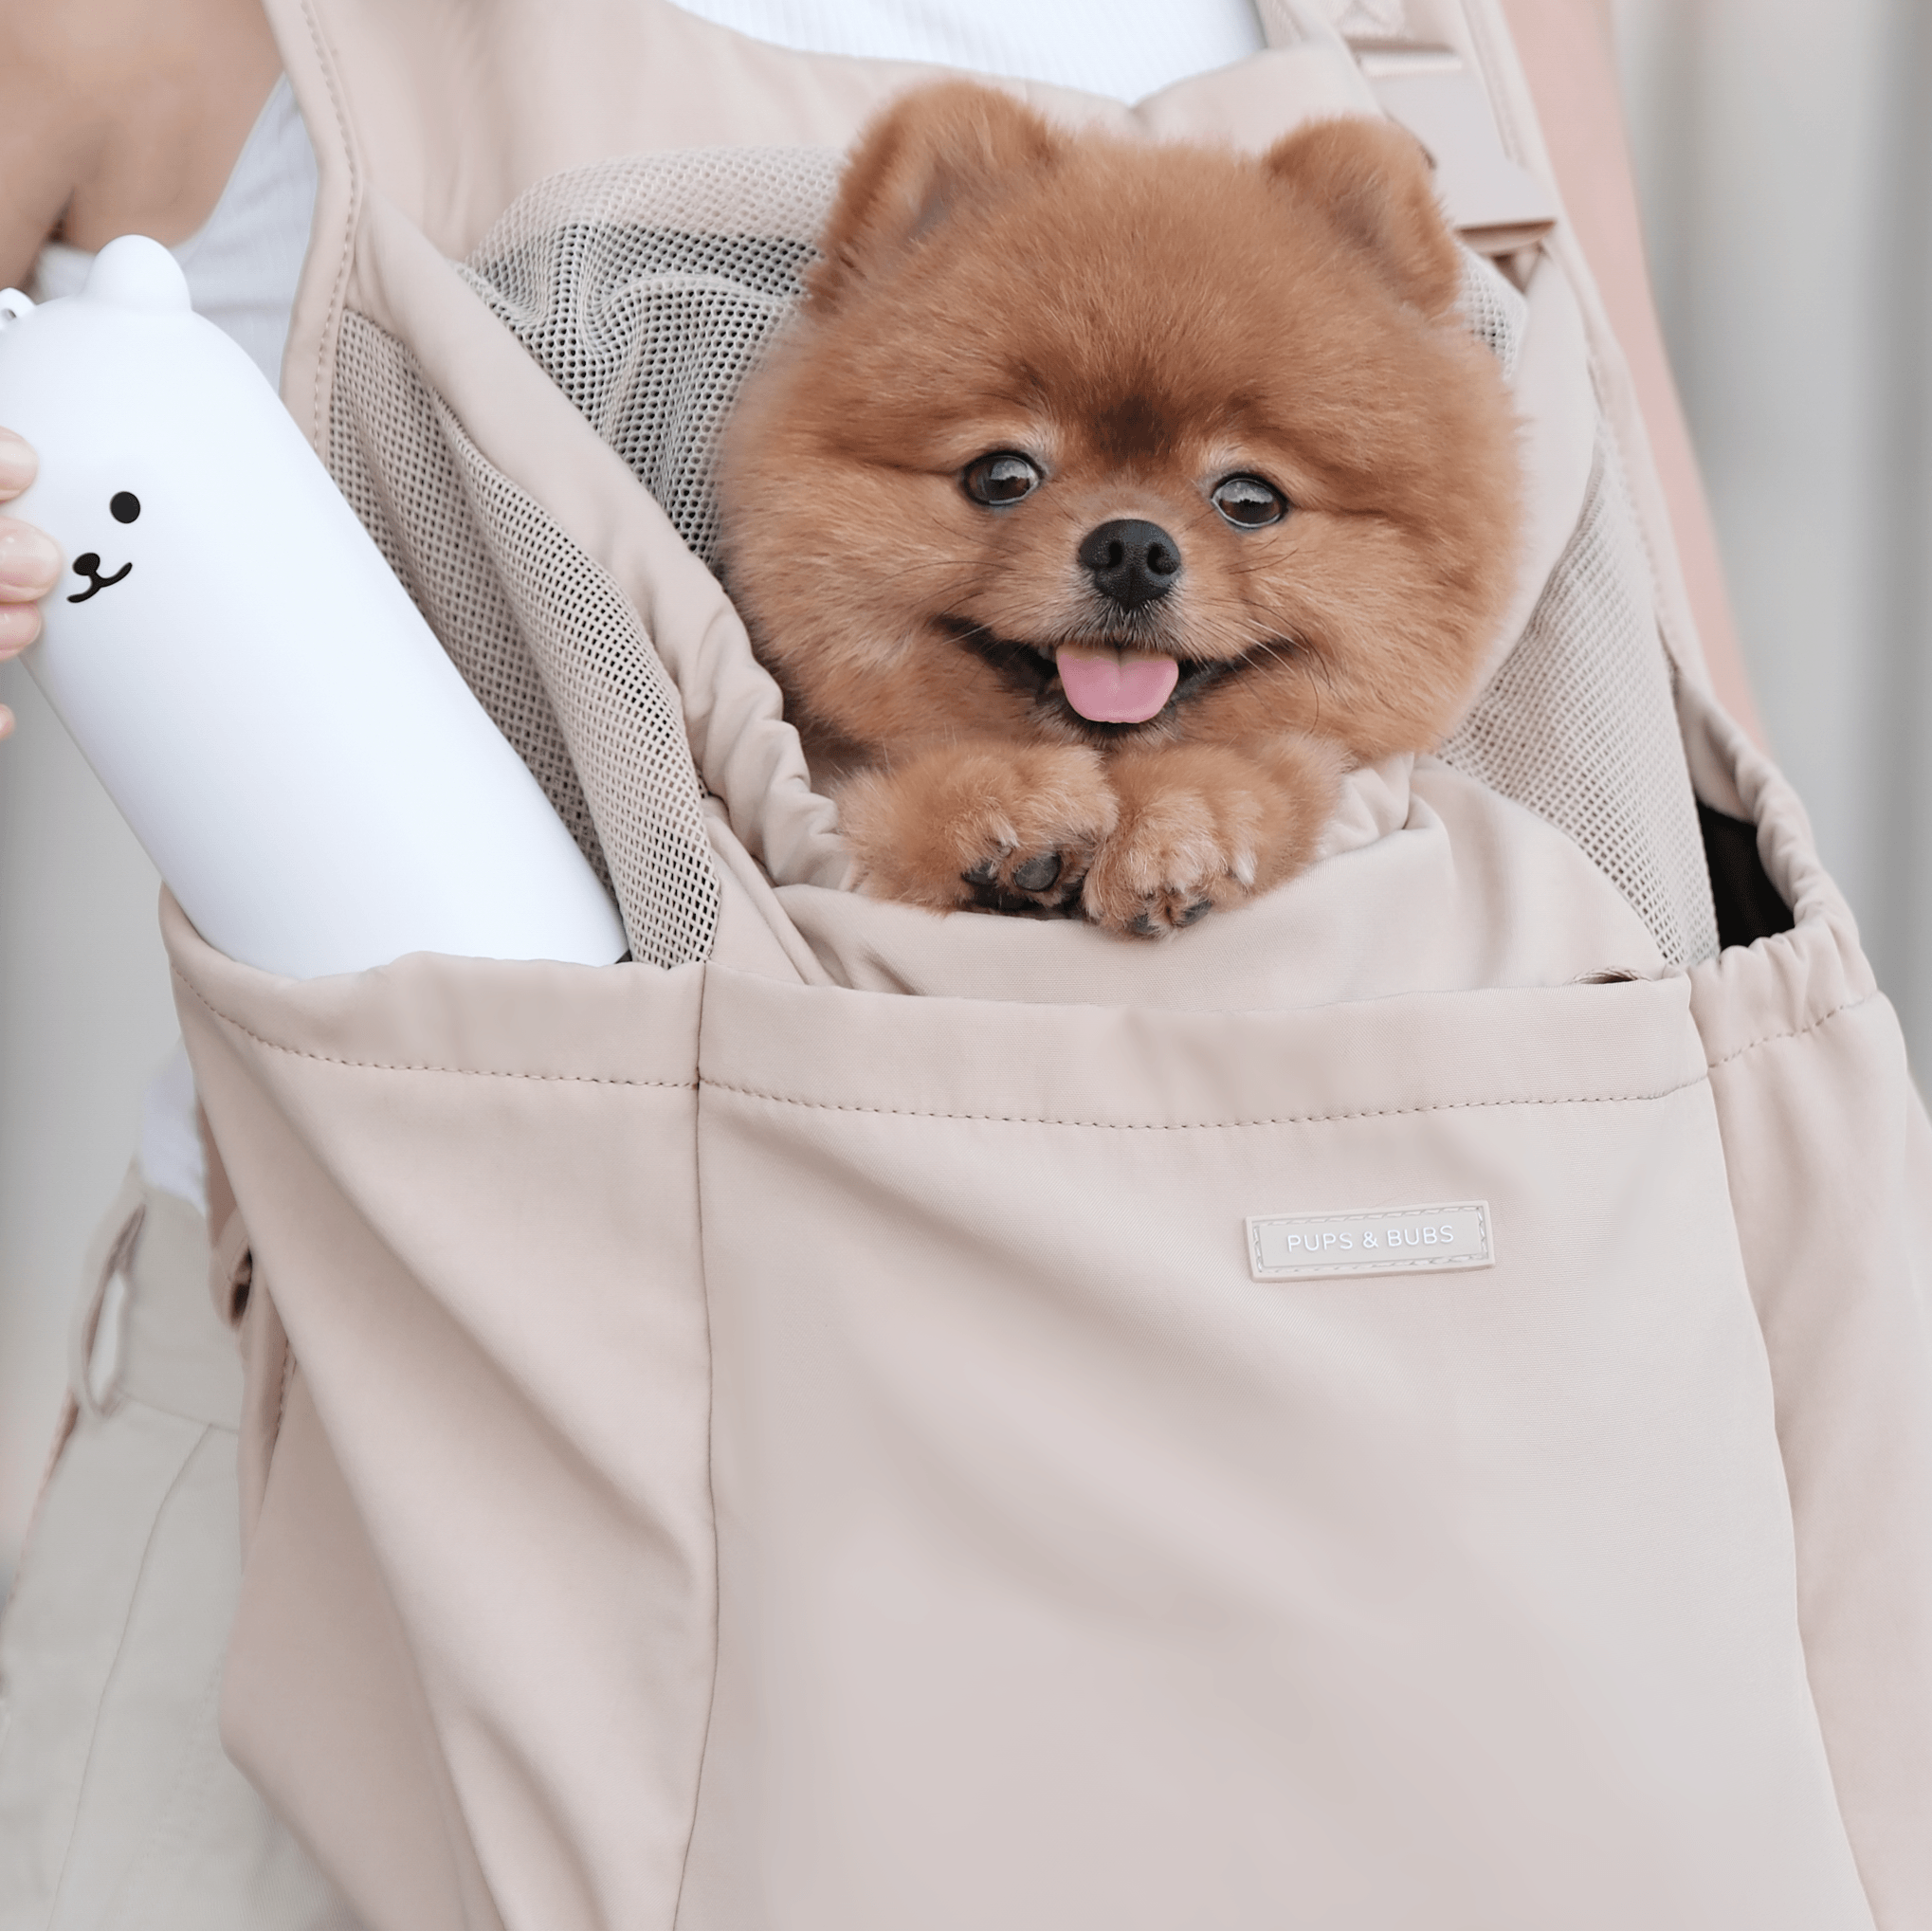 Pups & Bubs Everywhere Convertible Pet Carrier Tote Bag | Suitable for Dogs & Puppy